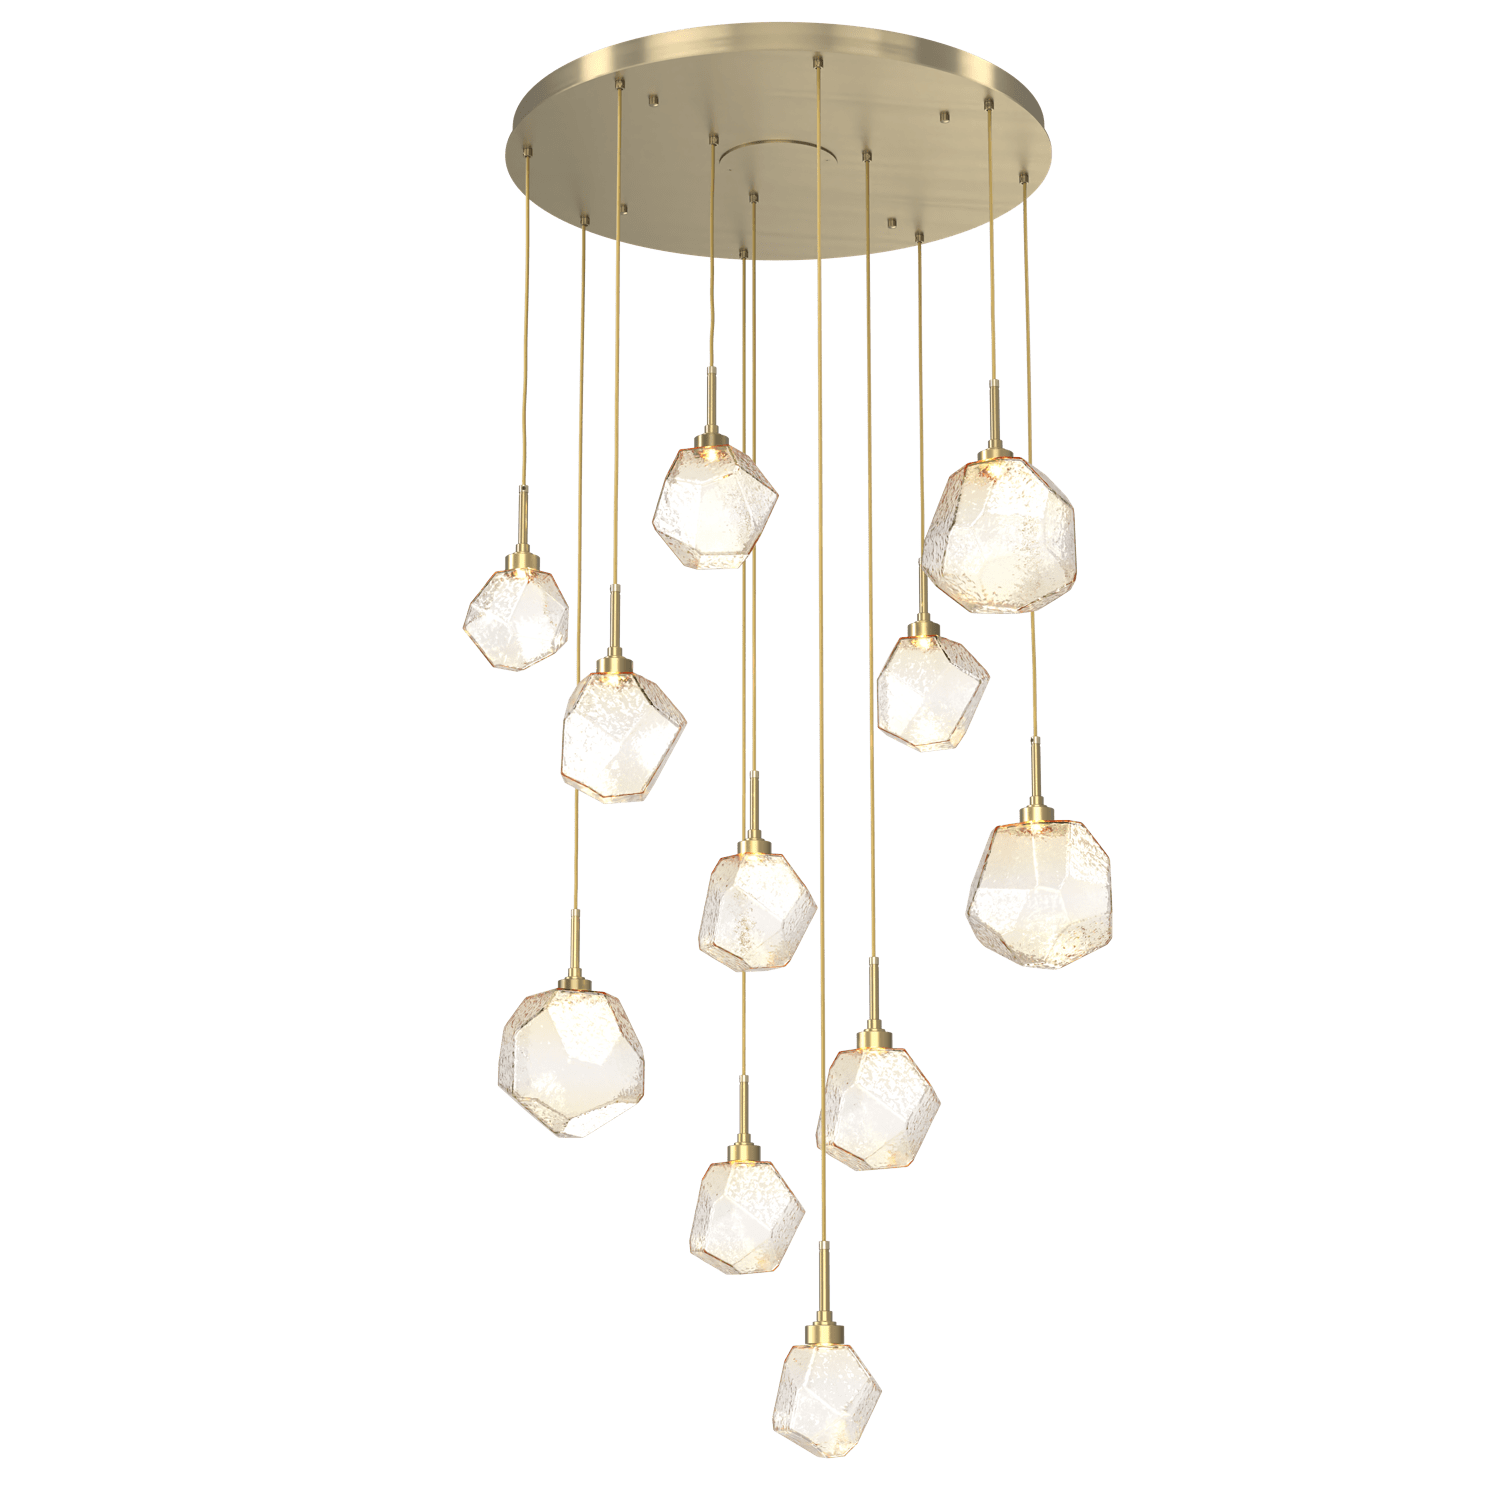 CHB0039-11-HB-A-Hammerton-Studio-Gem-11-light-round-pendant-chandelier-with-heritage-brass-finish-and-amber-blown-glass-shades-and-LED-lamping